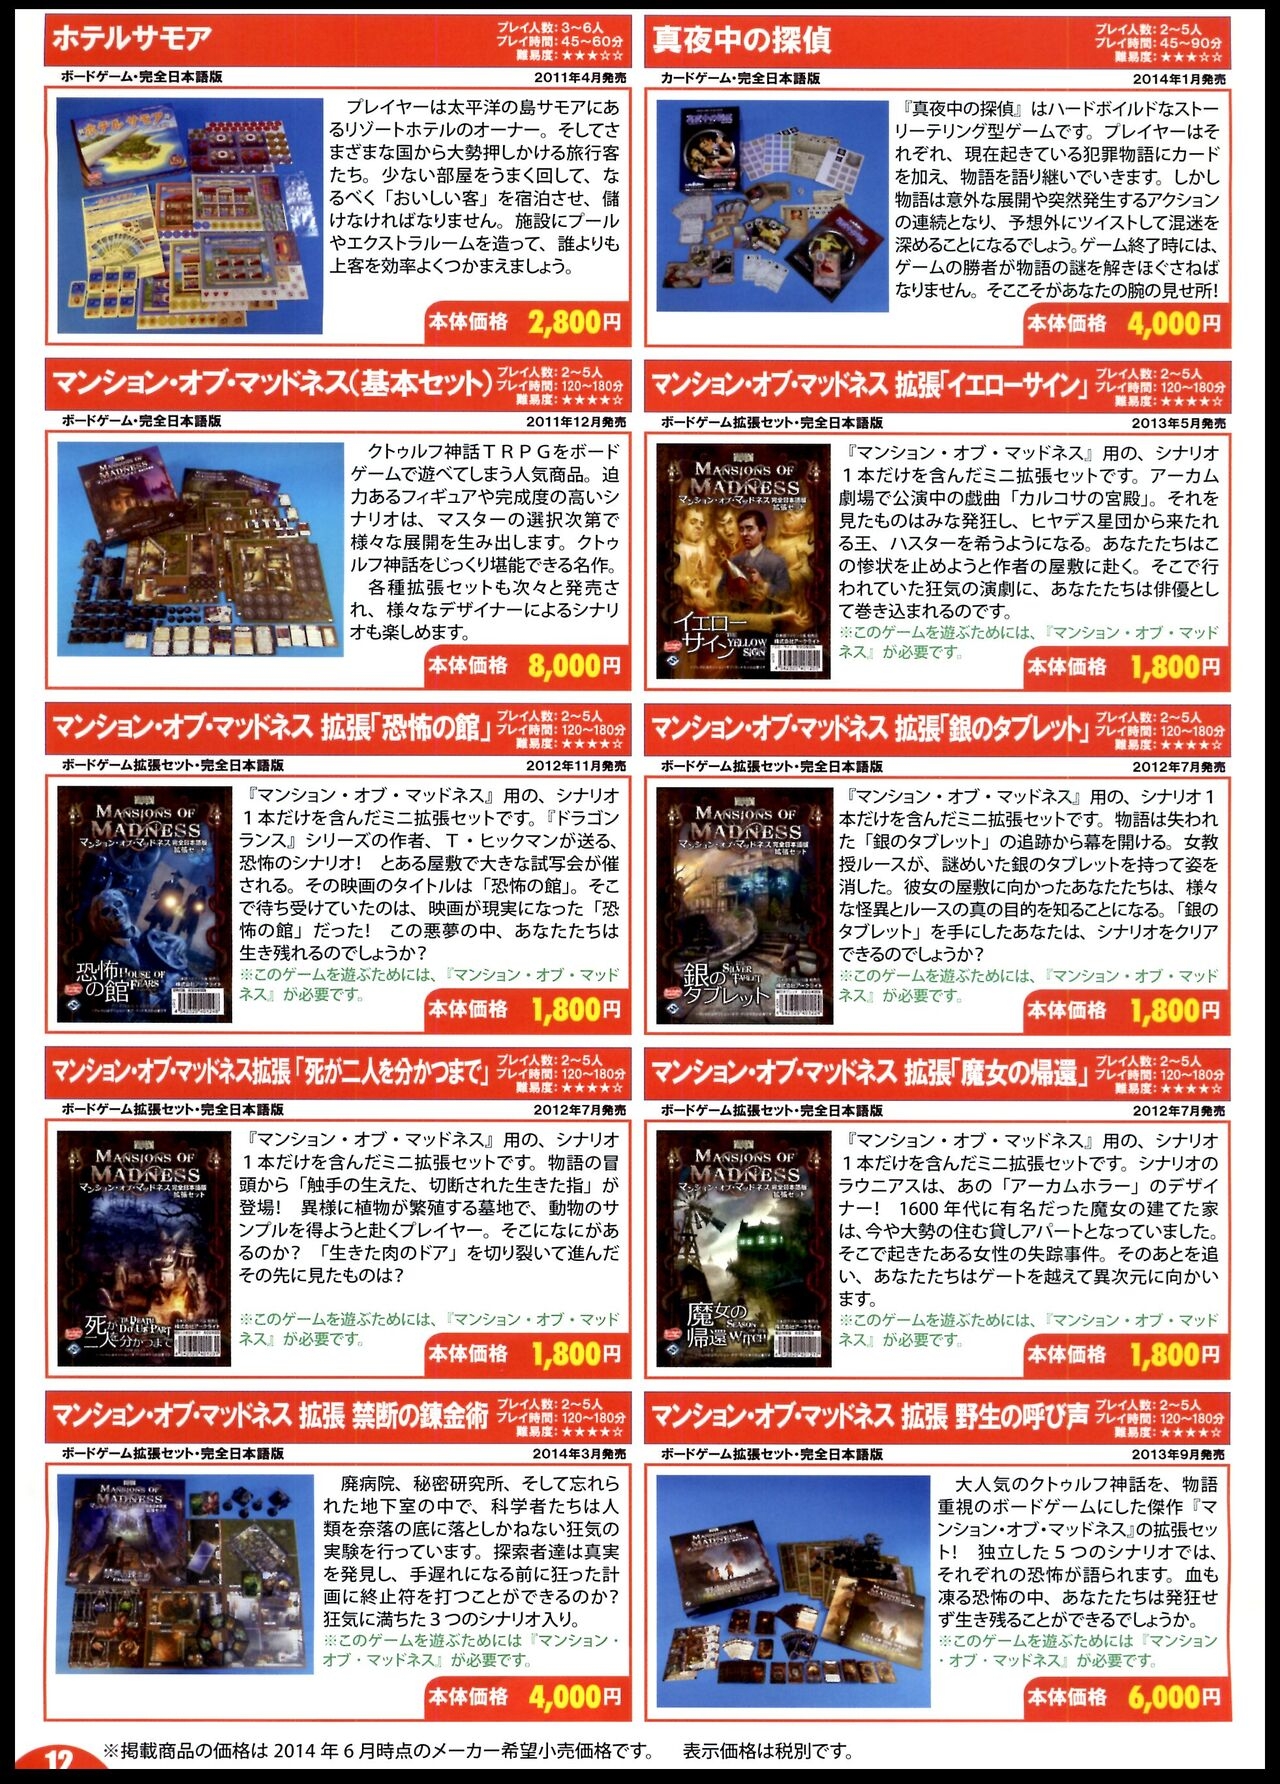 [Arclight Games] Board game catalog 2014 Summer - Autumn 11